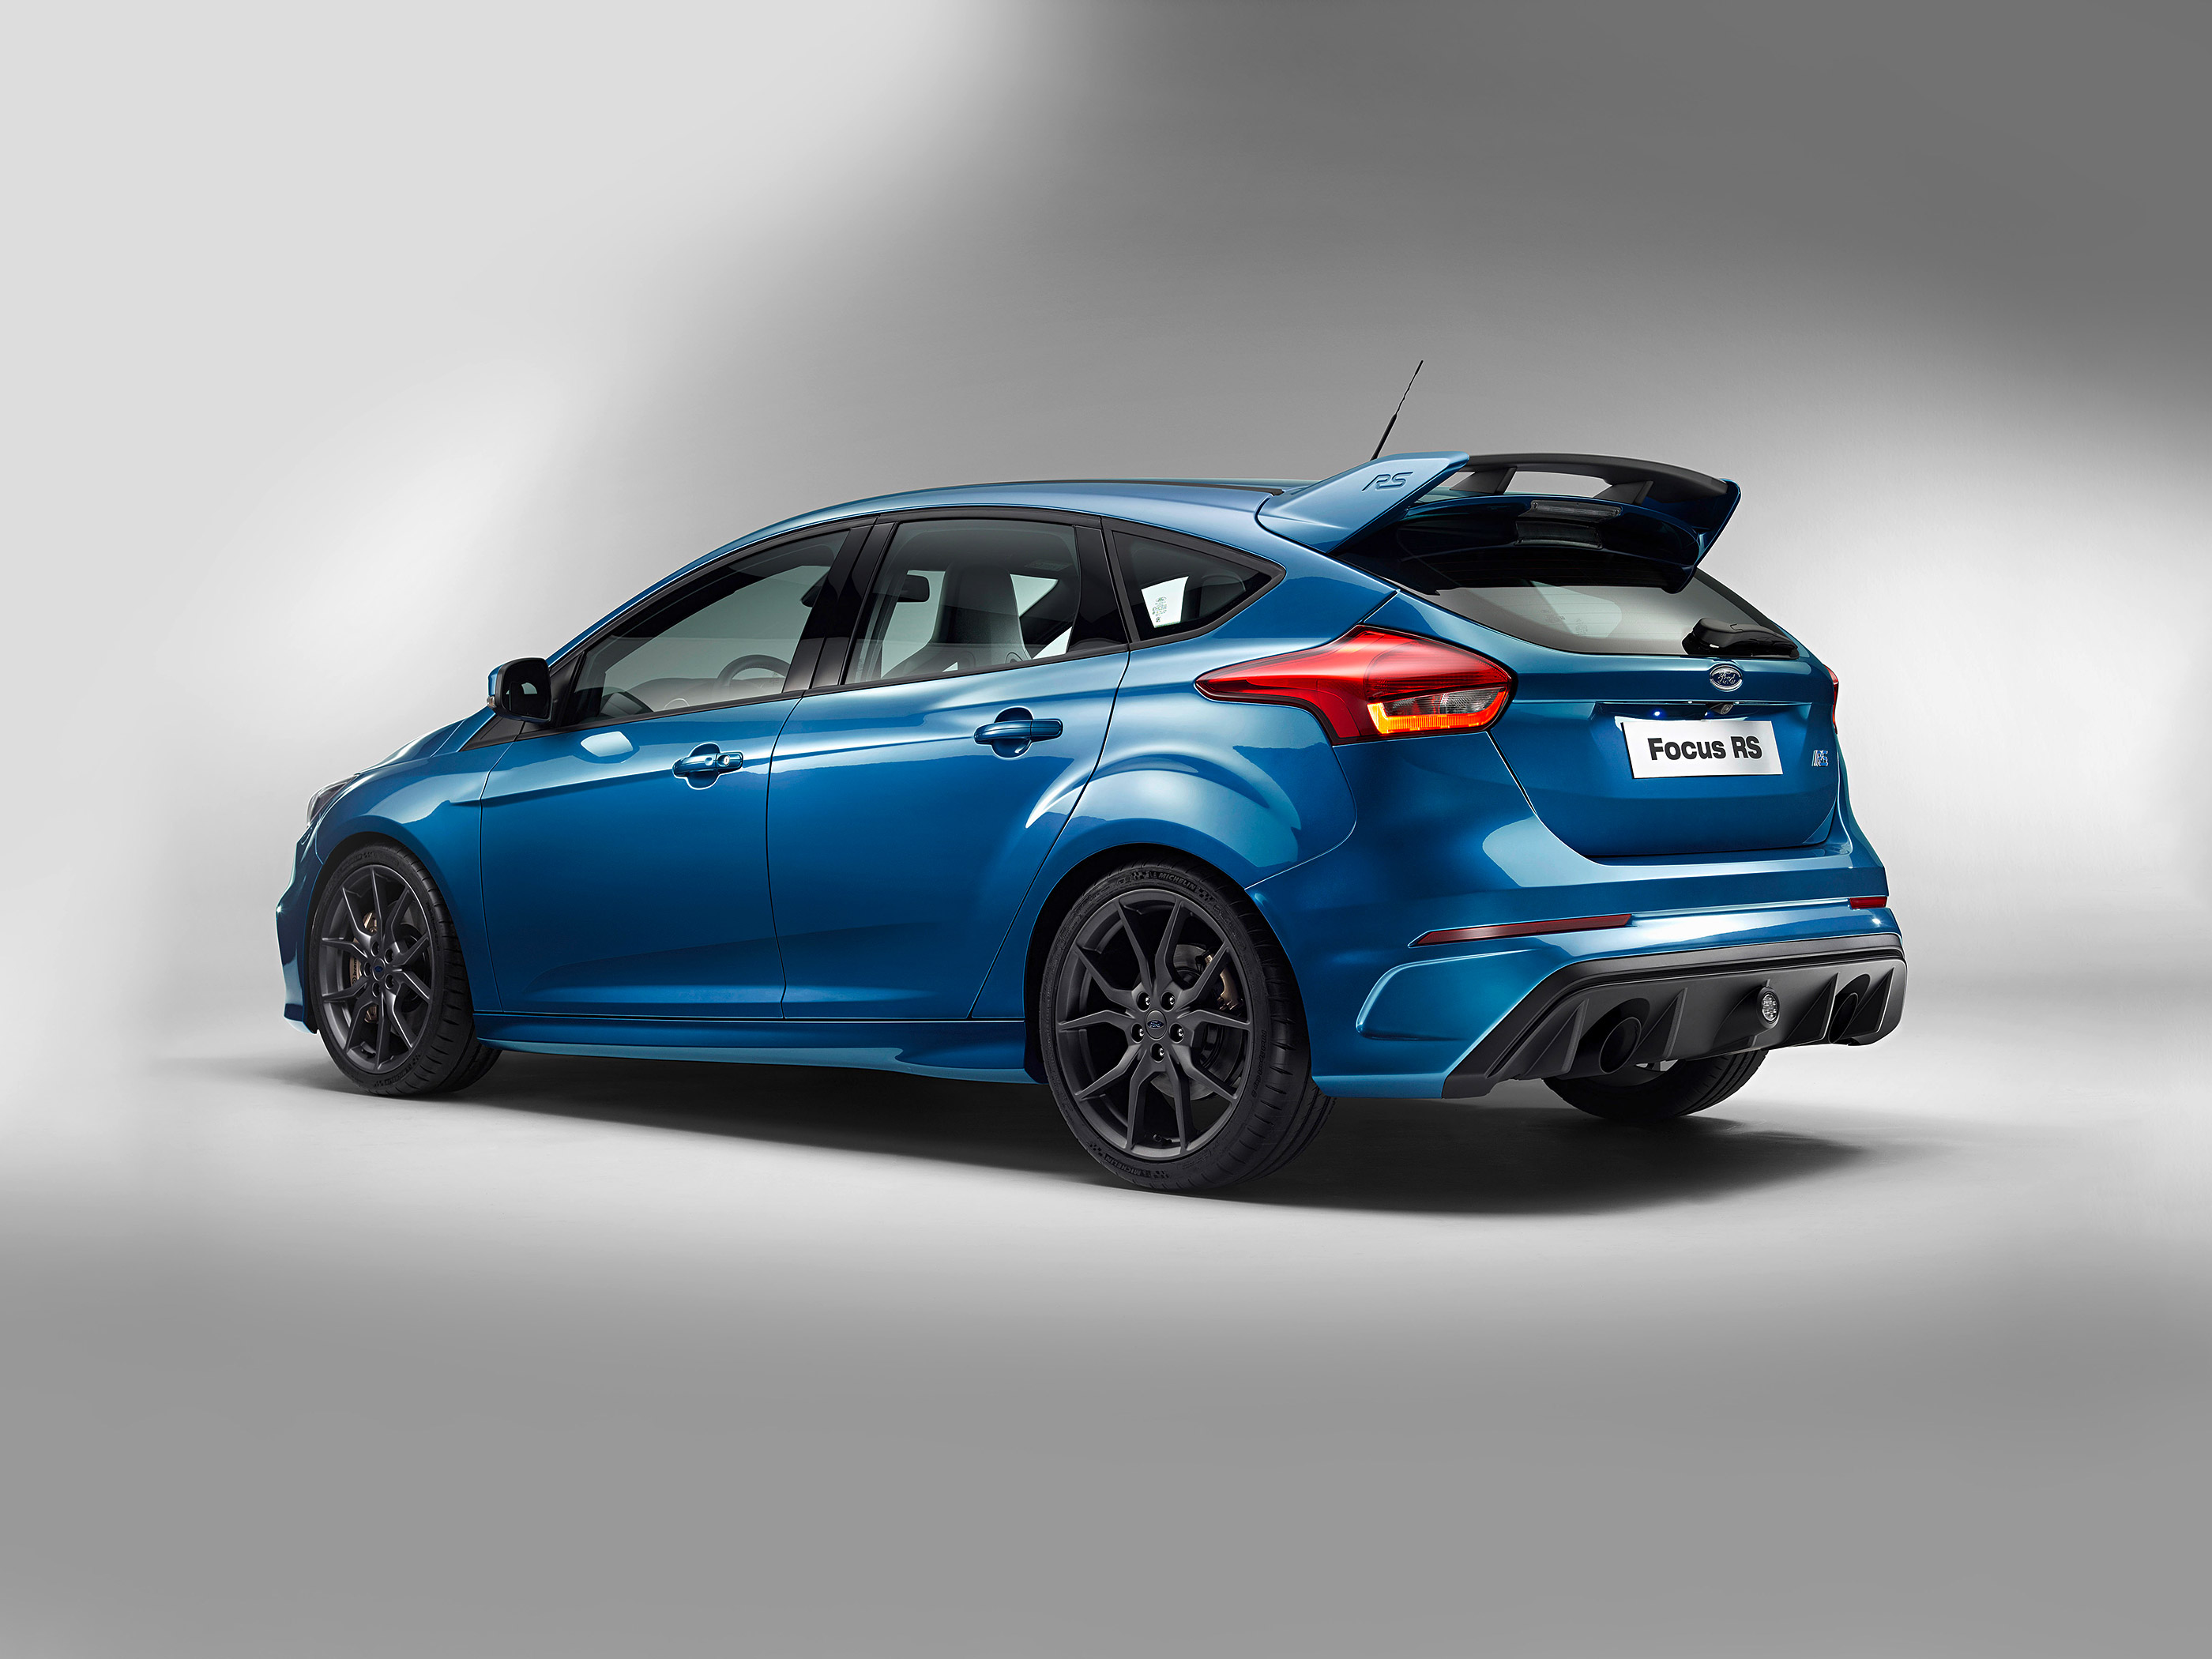  2016 Ford Focus RS Wallpaper.